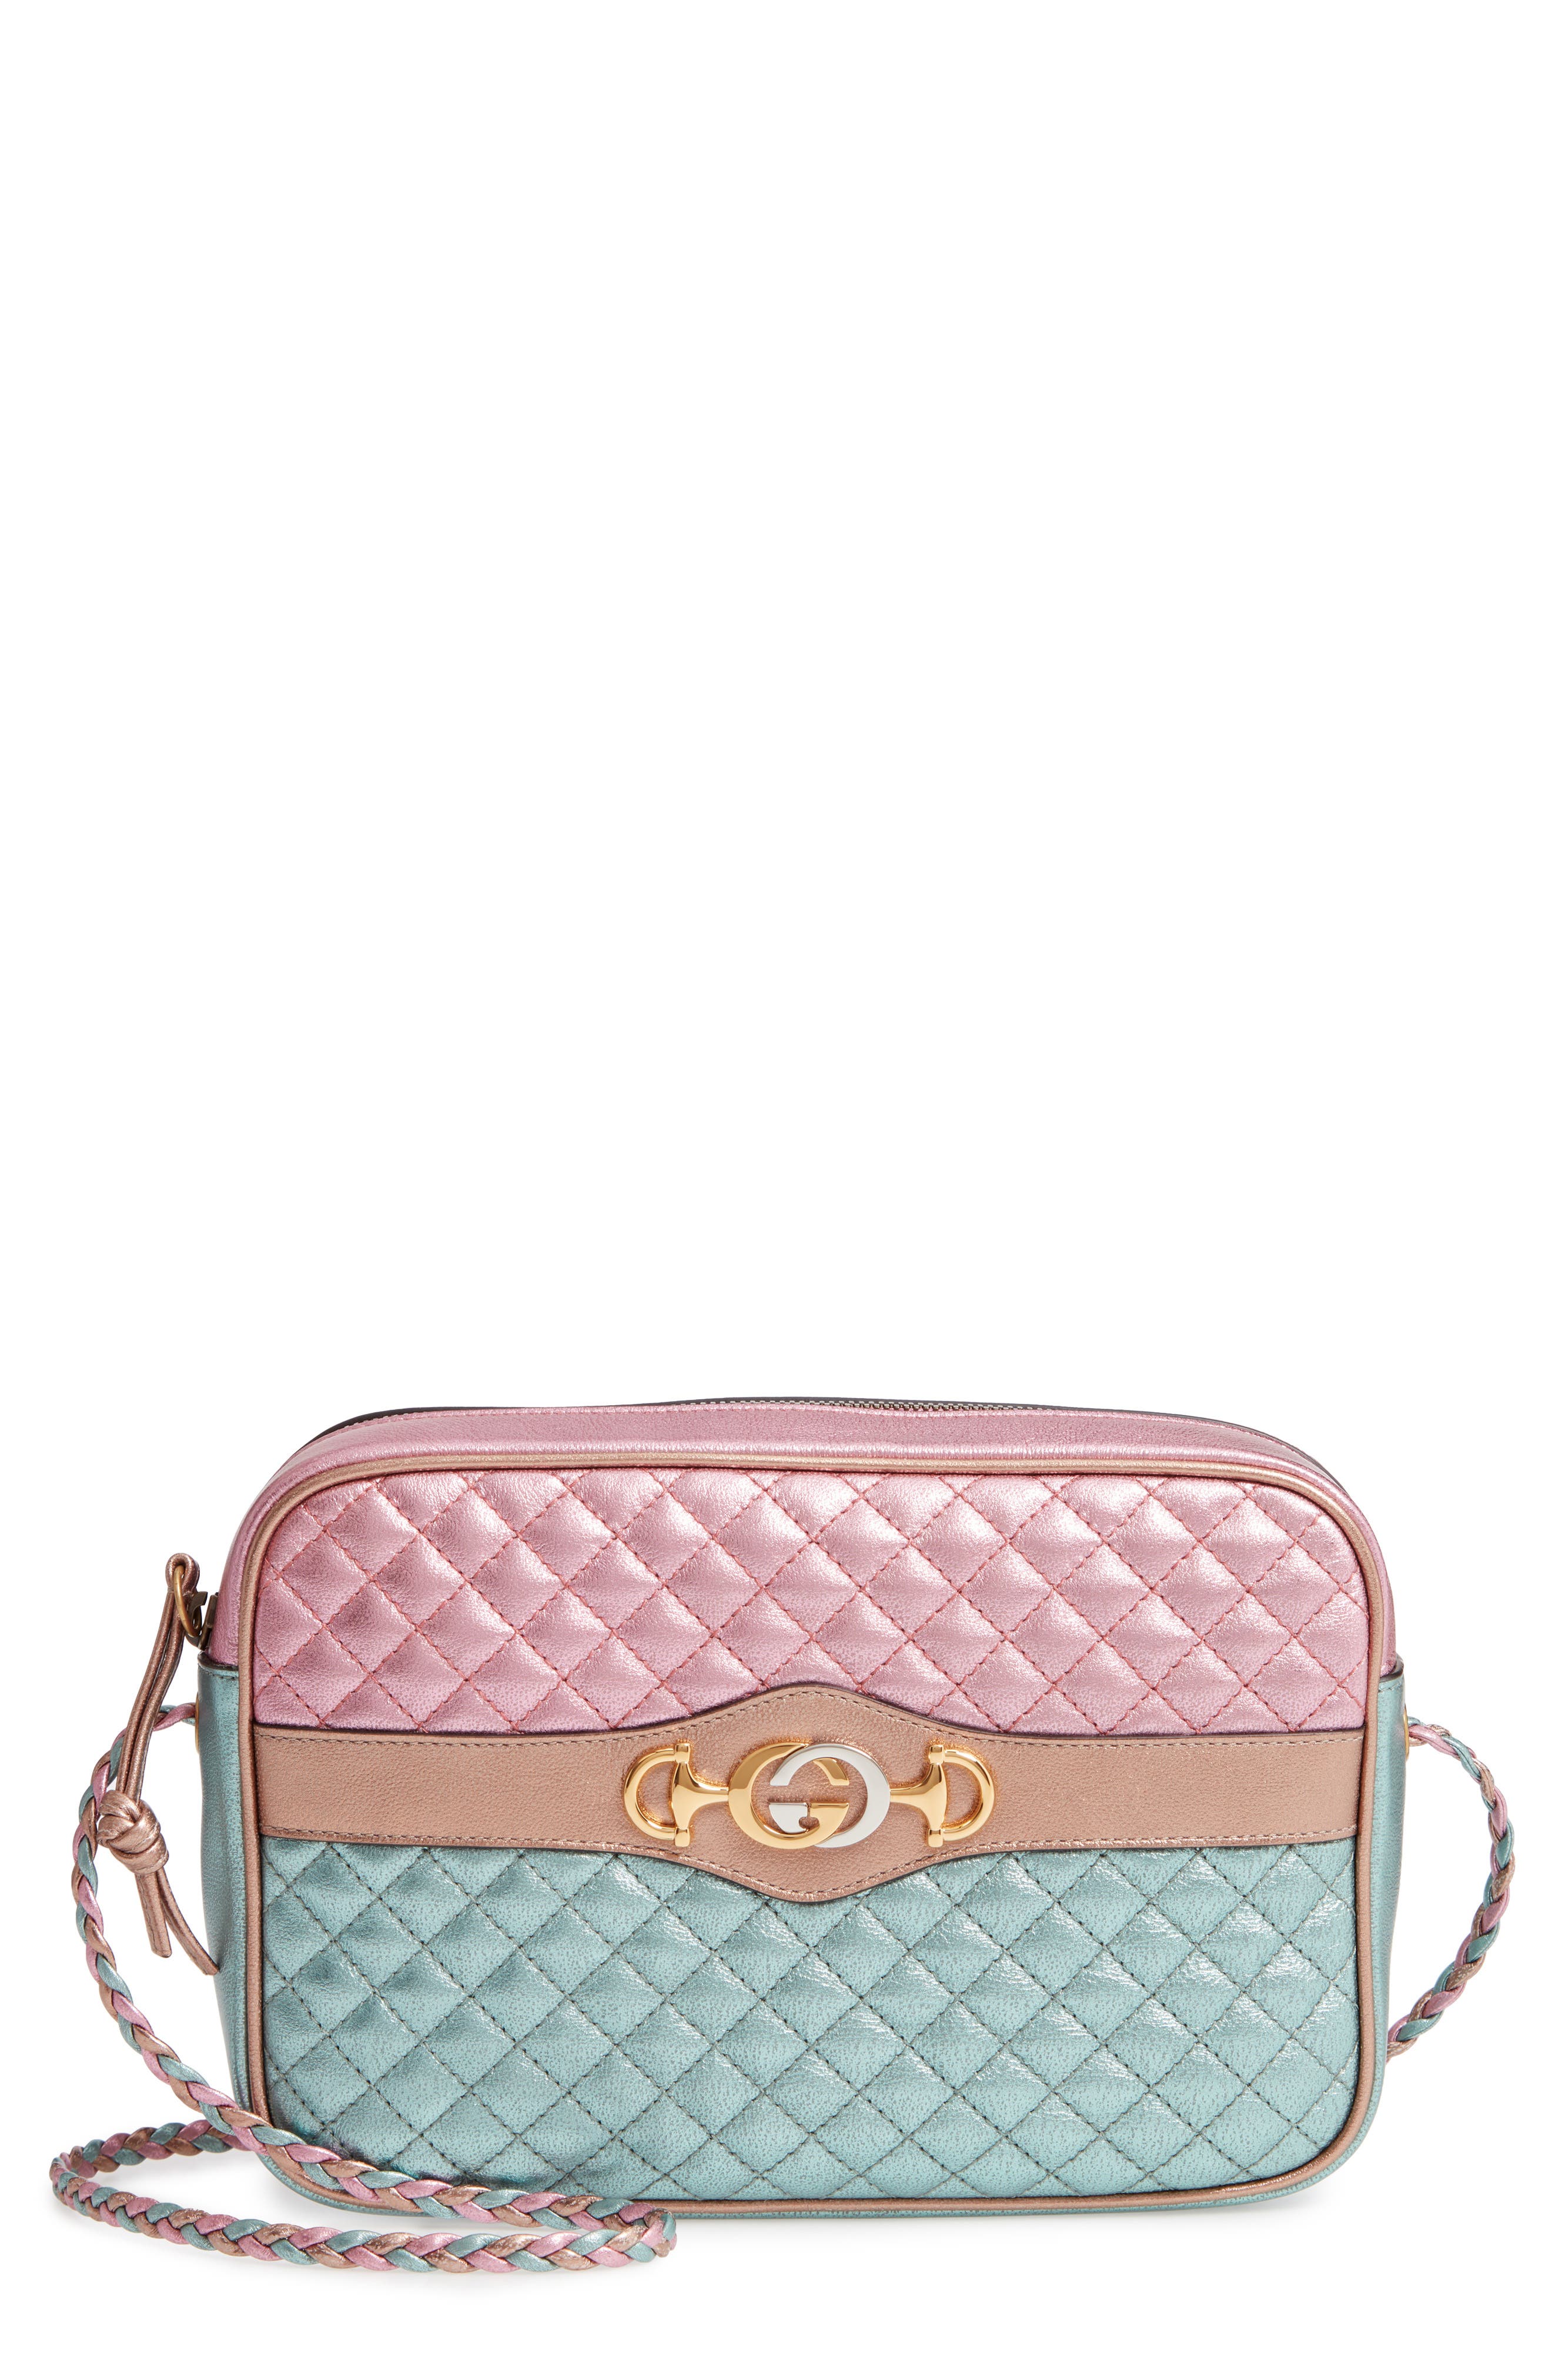 Gucci Small Quilted Metallic Leather 